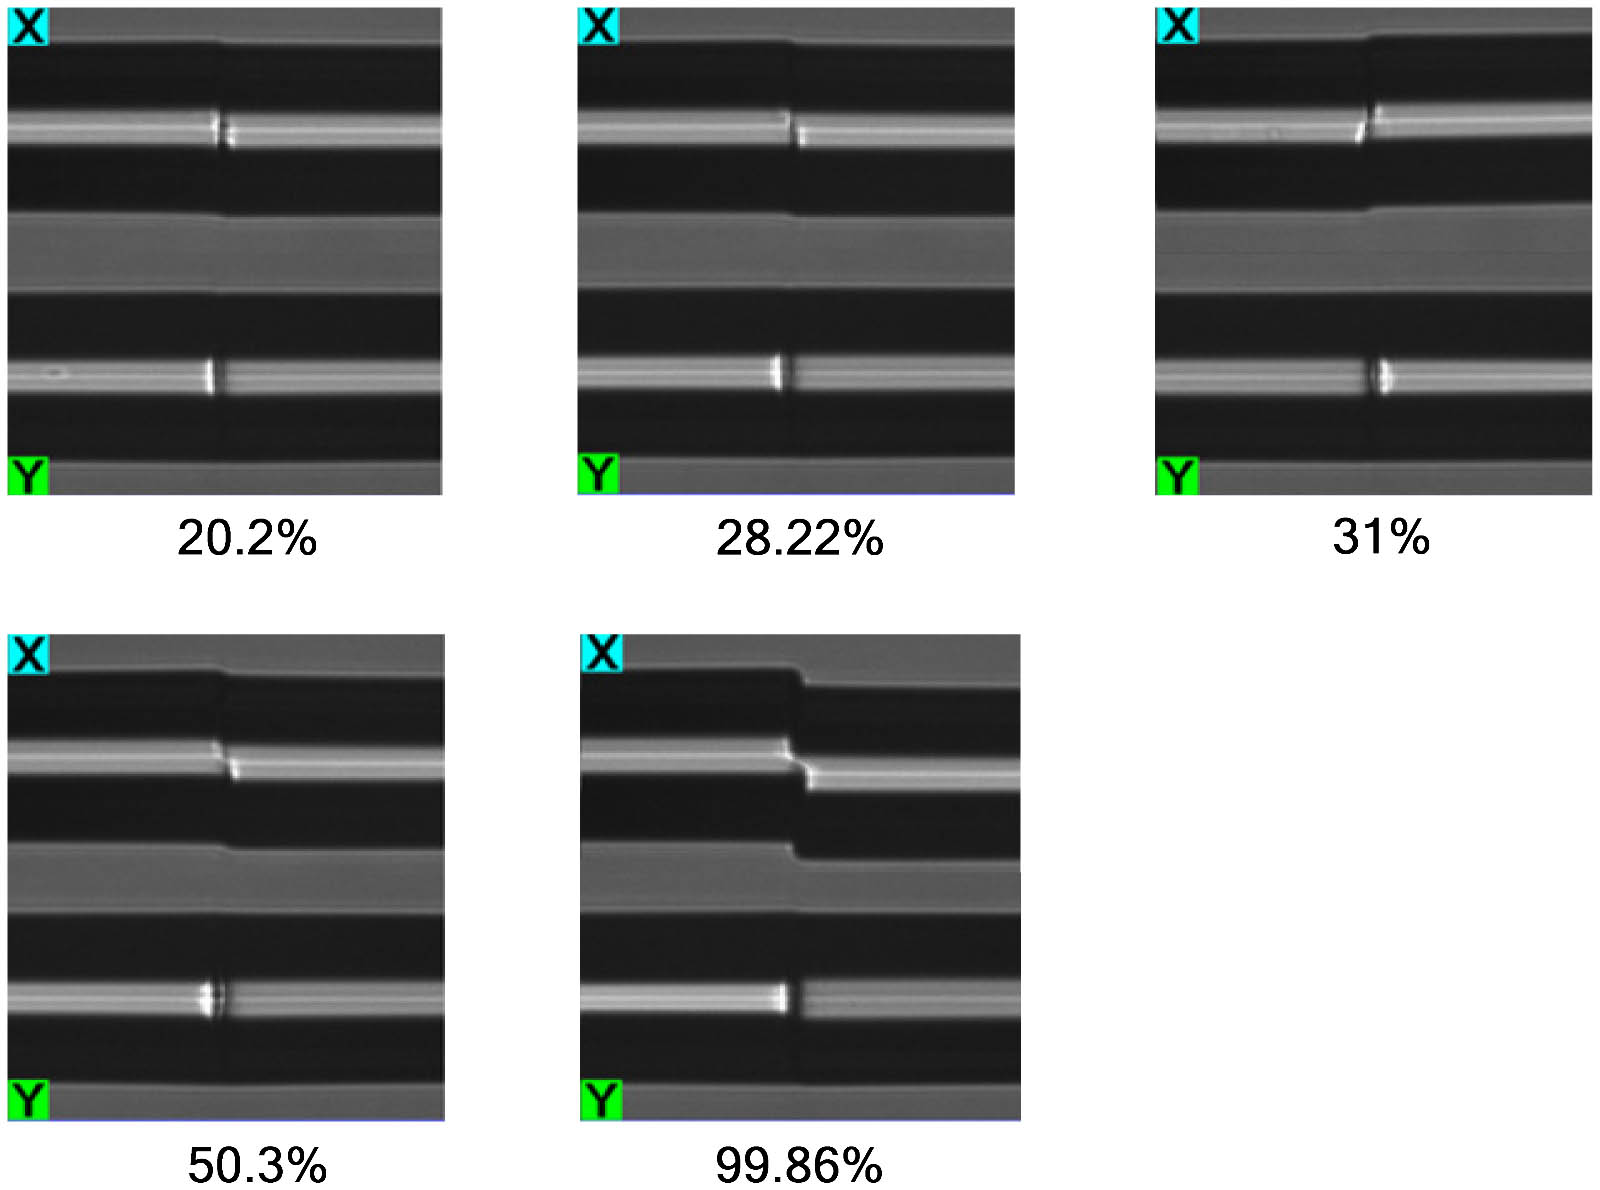 Core-offset units with varying dislocation sizes photographed by the fiber fusion splicer with coupling ratios of 20.2%, 28.22%, 31%, 50.3%, and 99.86%, respectively.